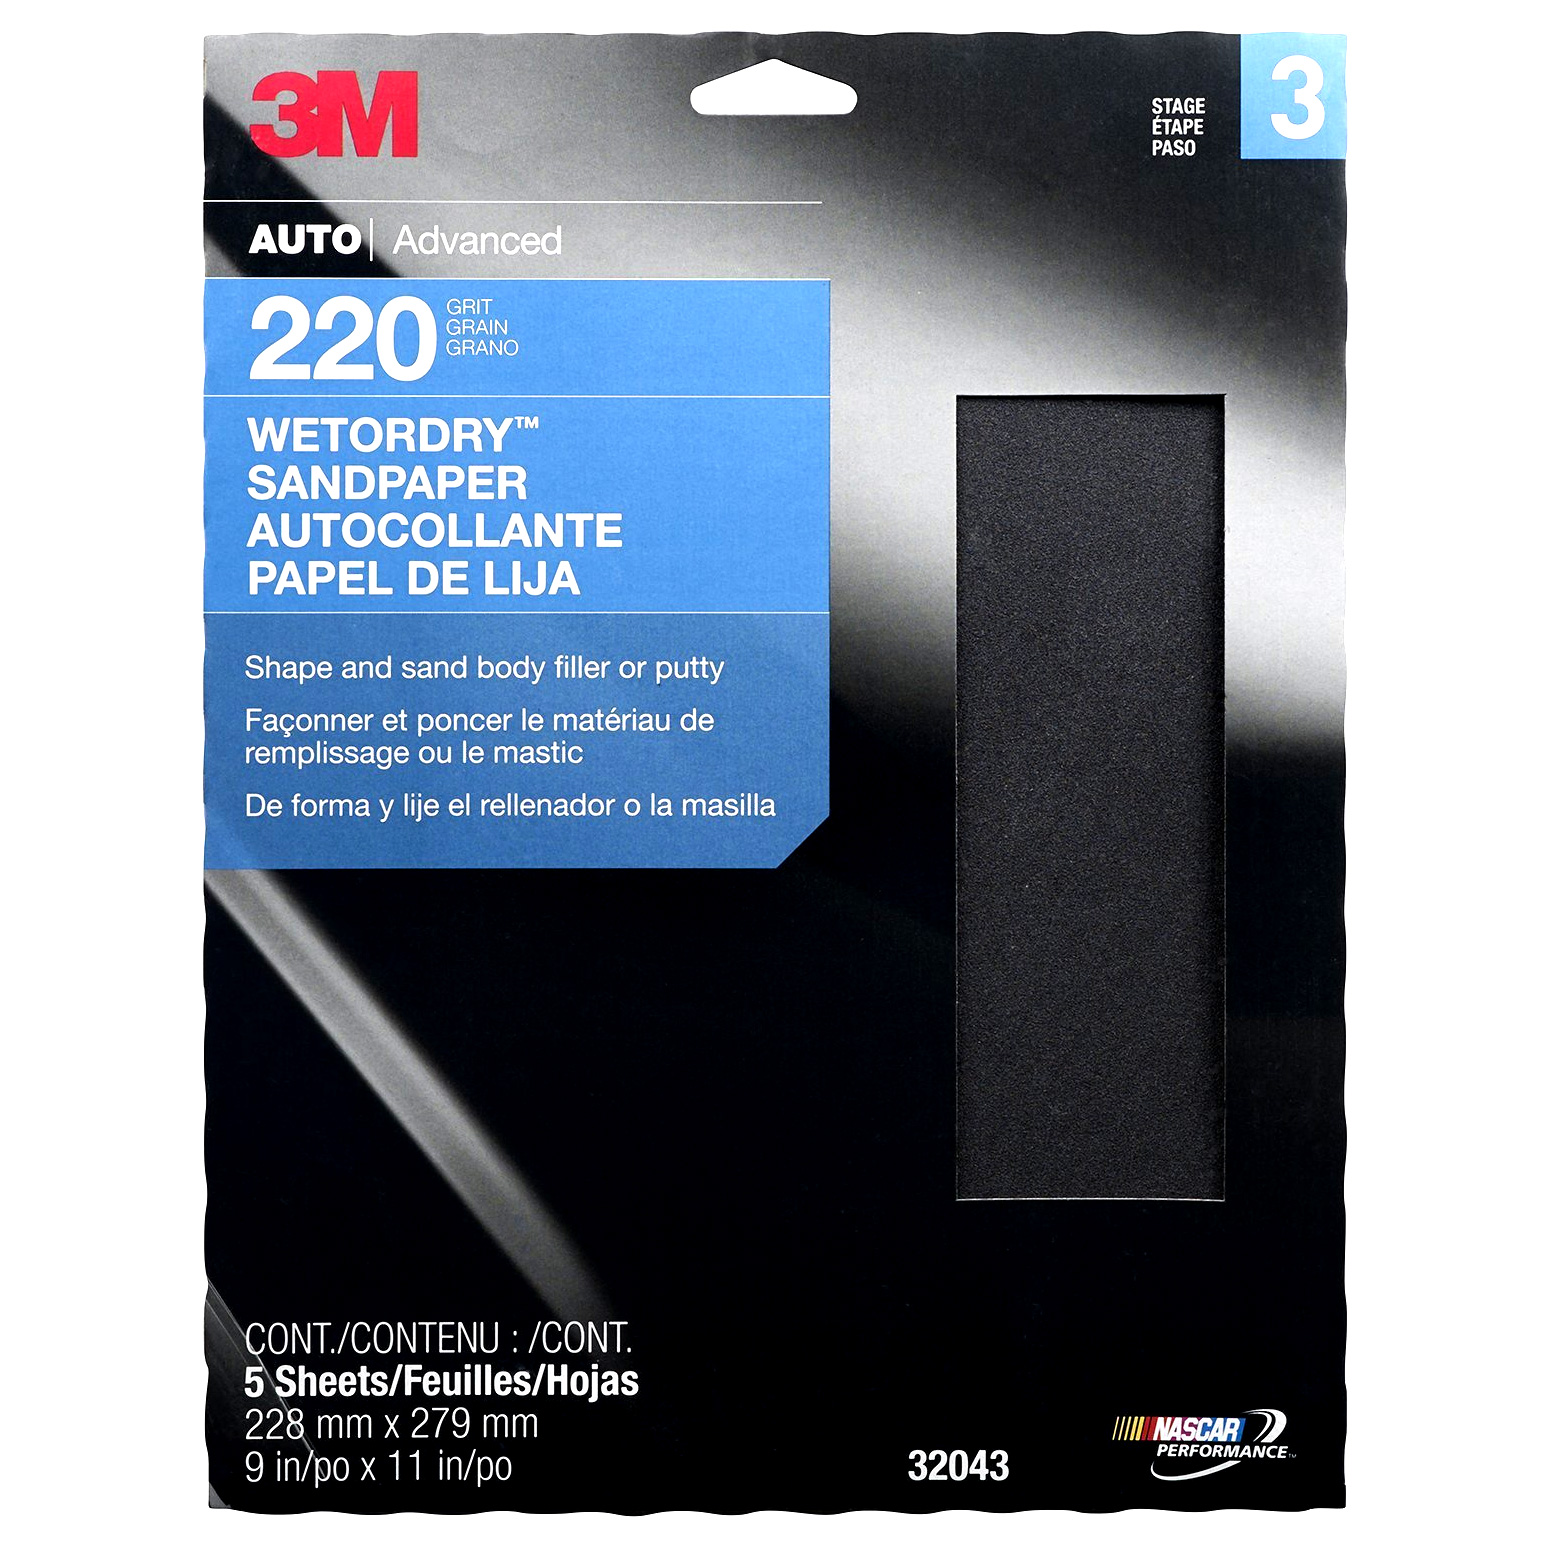 3M Production Sheet 32118 9 in x 11 in 40 Grit 